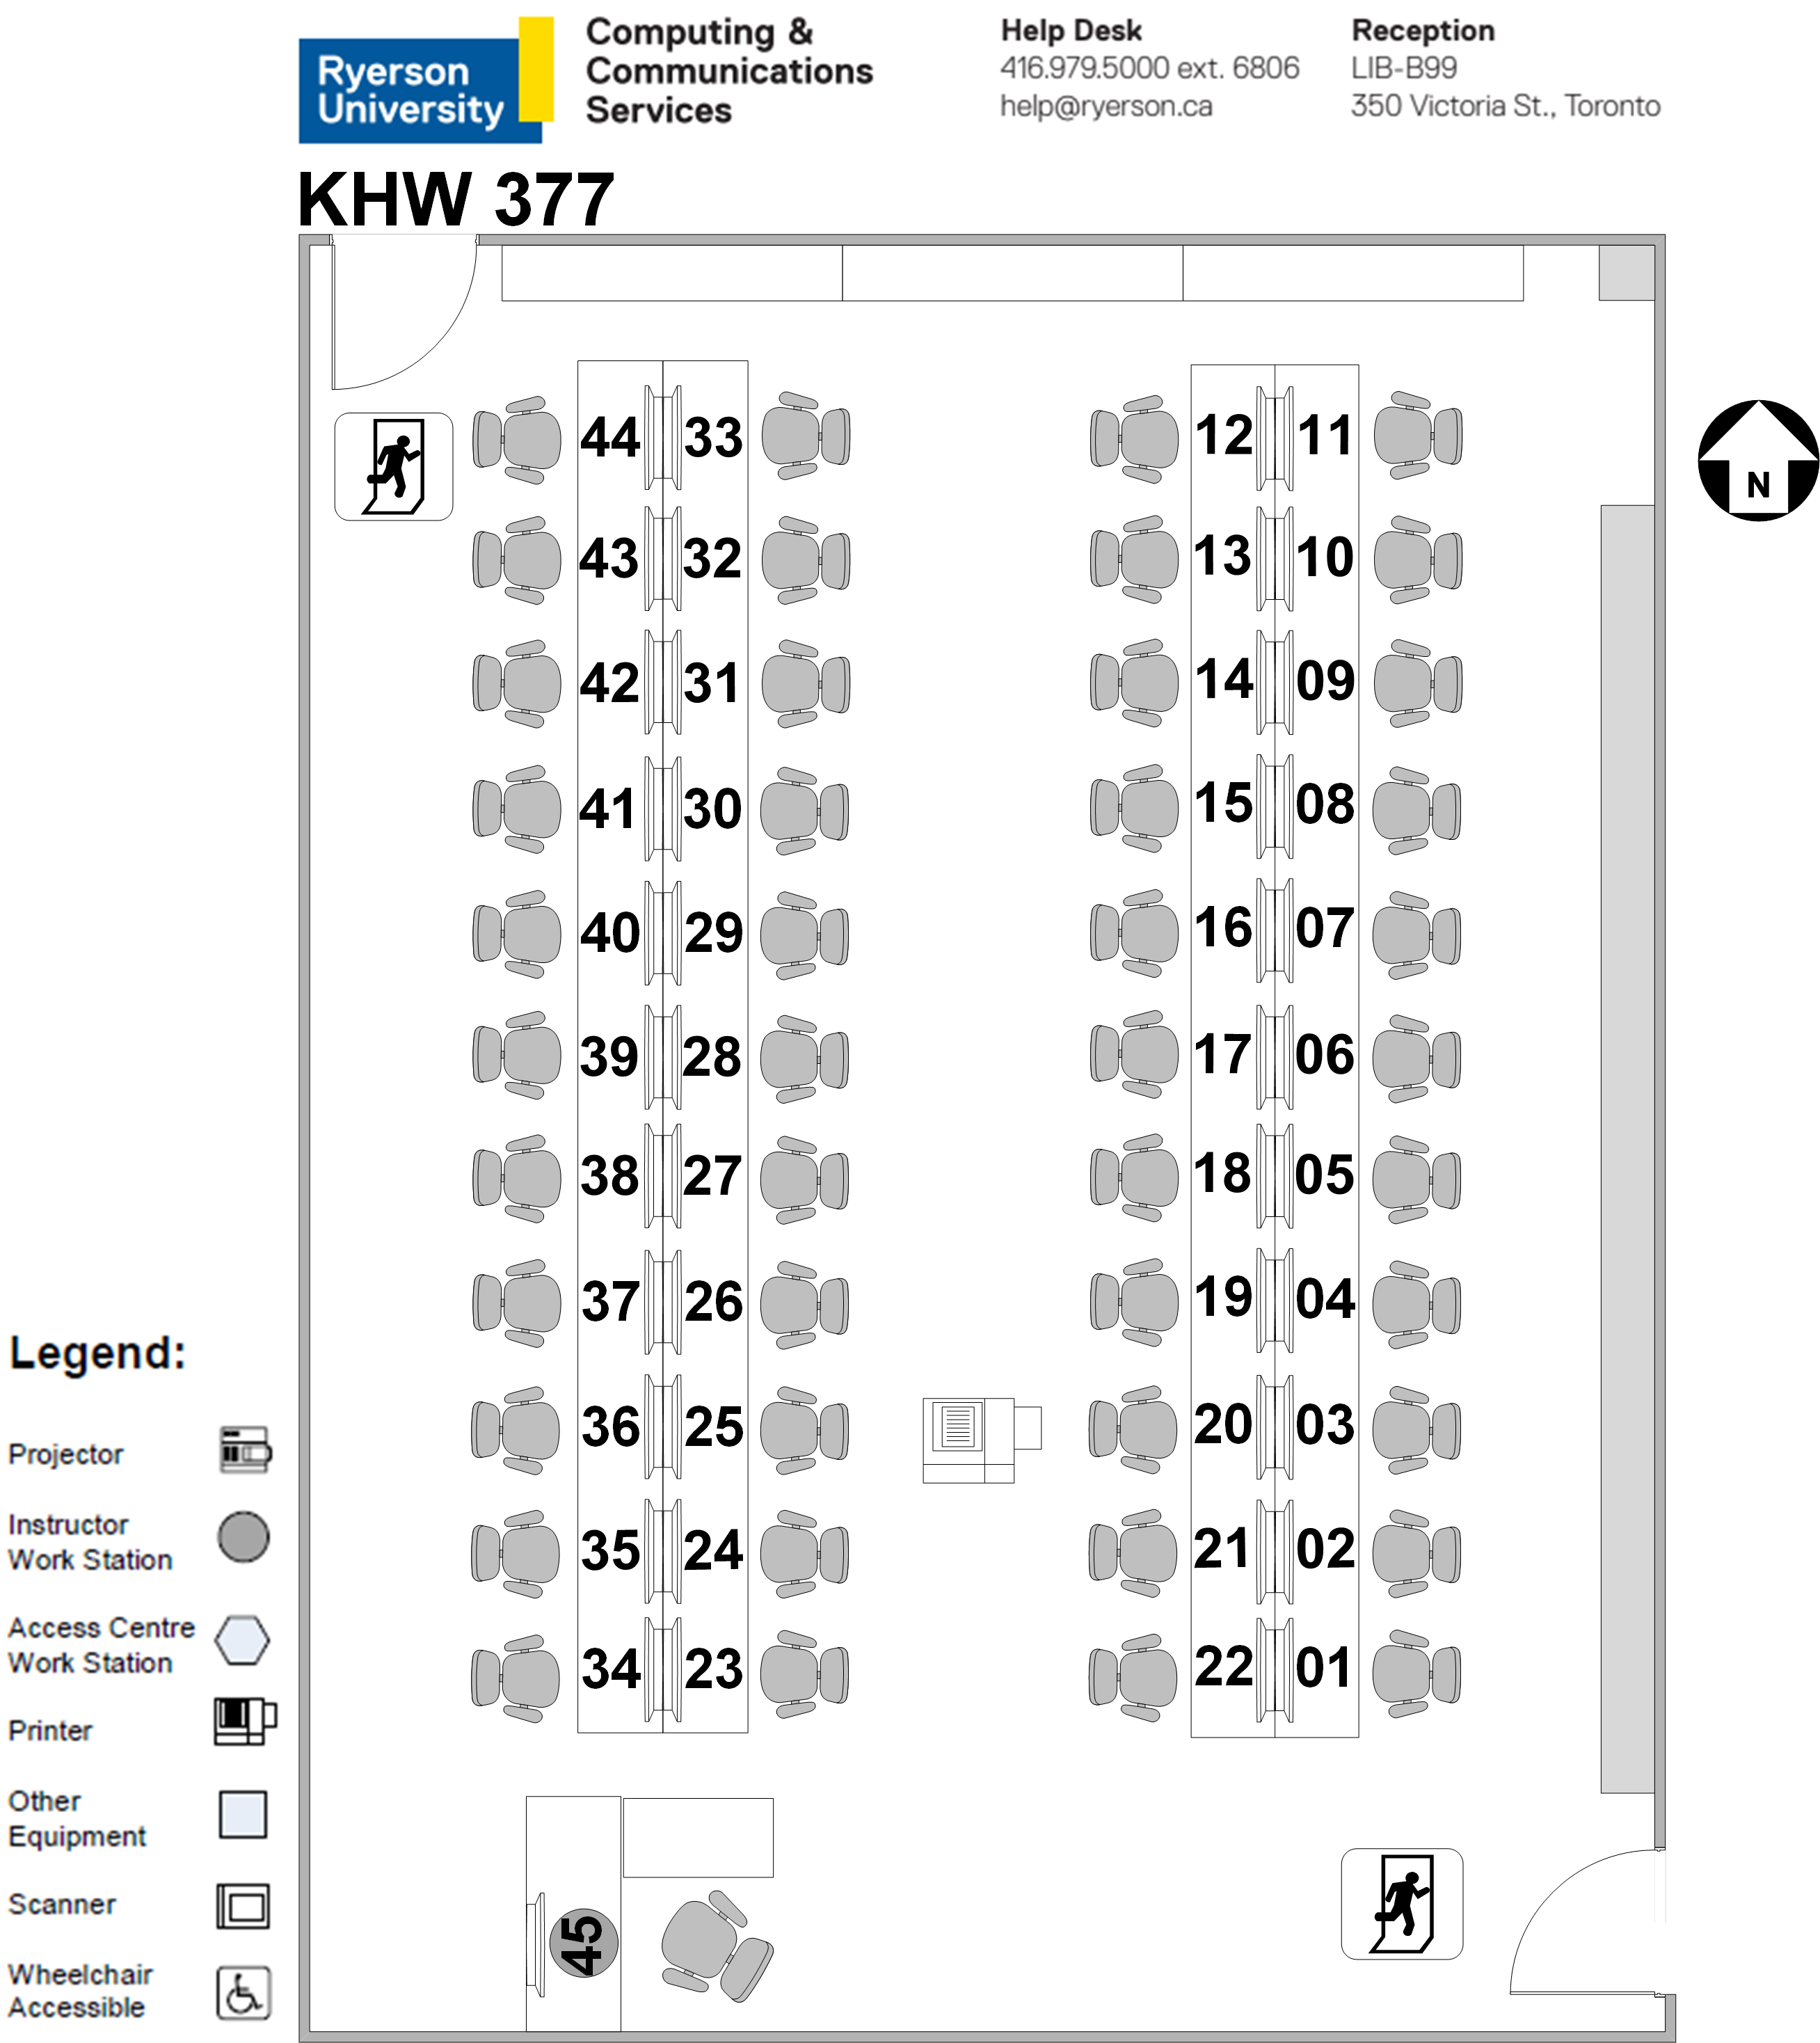 KHW377 has 45 workstations which includes a projector and instructor work station.